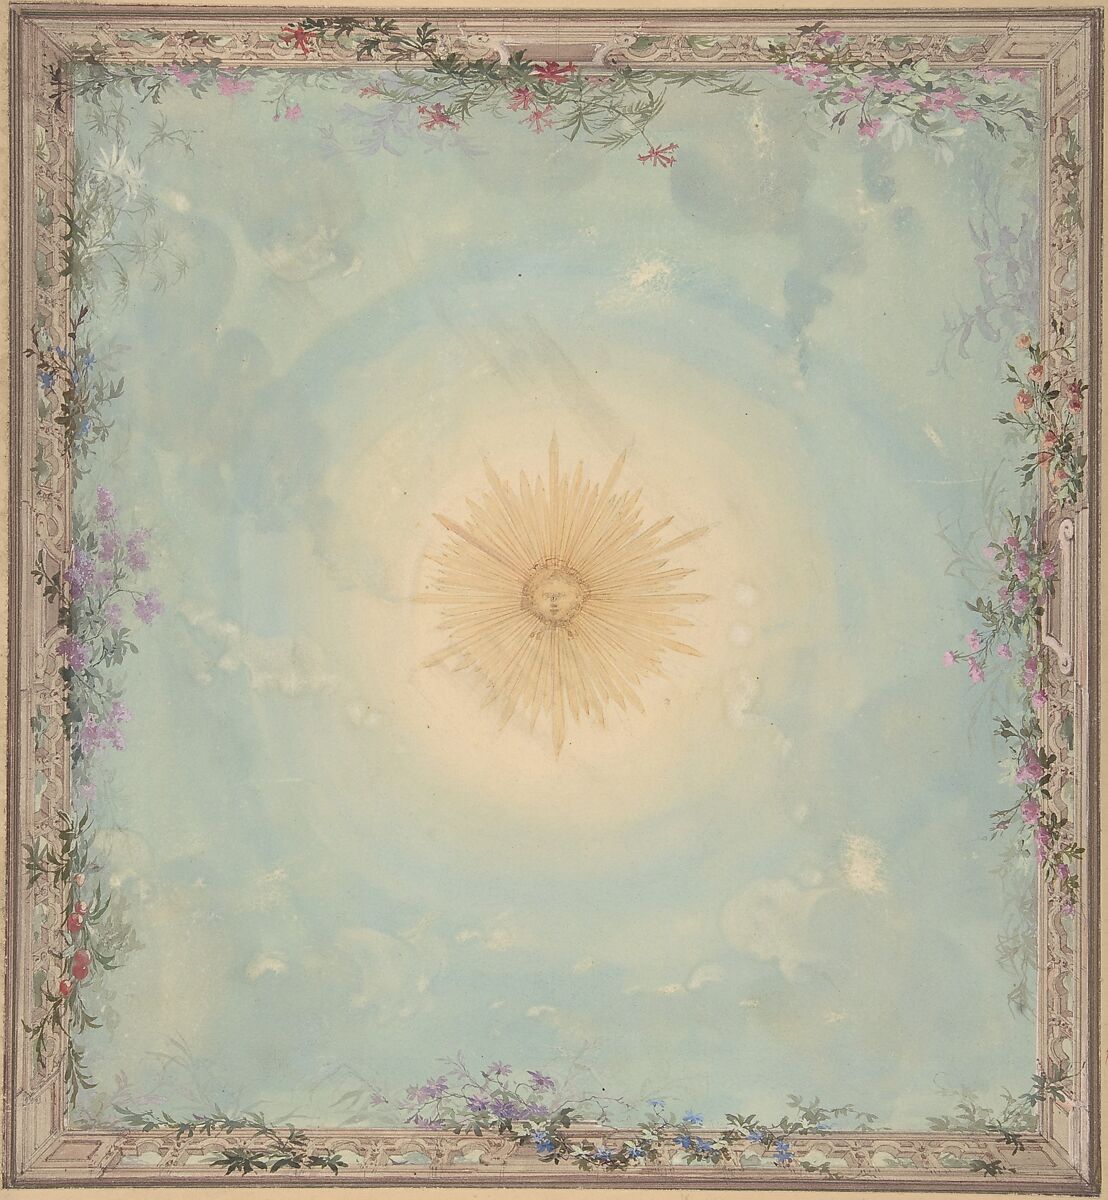 Designs for Ceilings with Central Sunburst, Charles Monblond (French, 19th century), Watercolor and graphite 